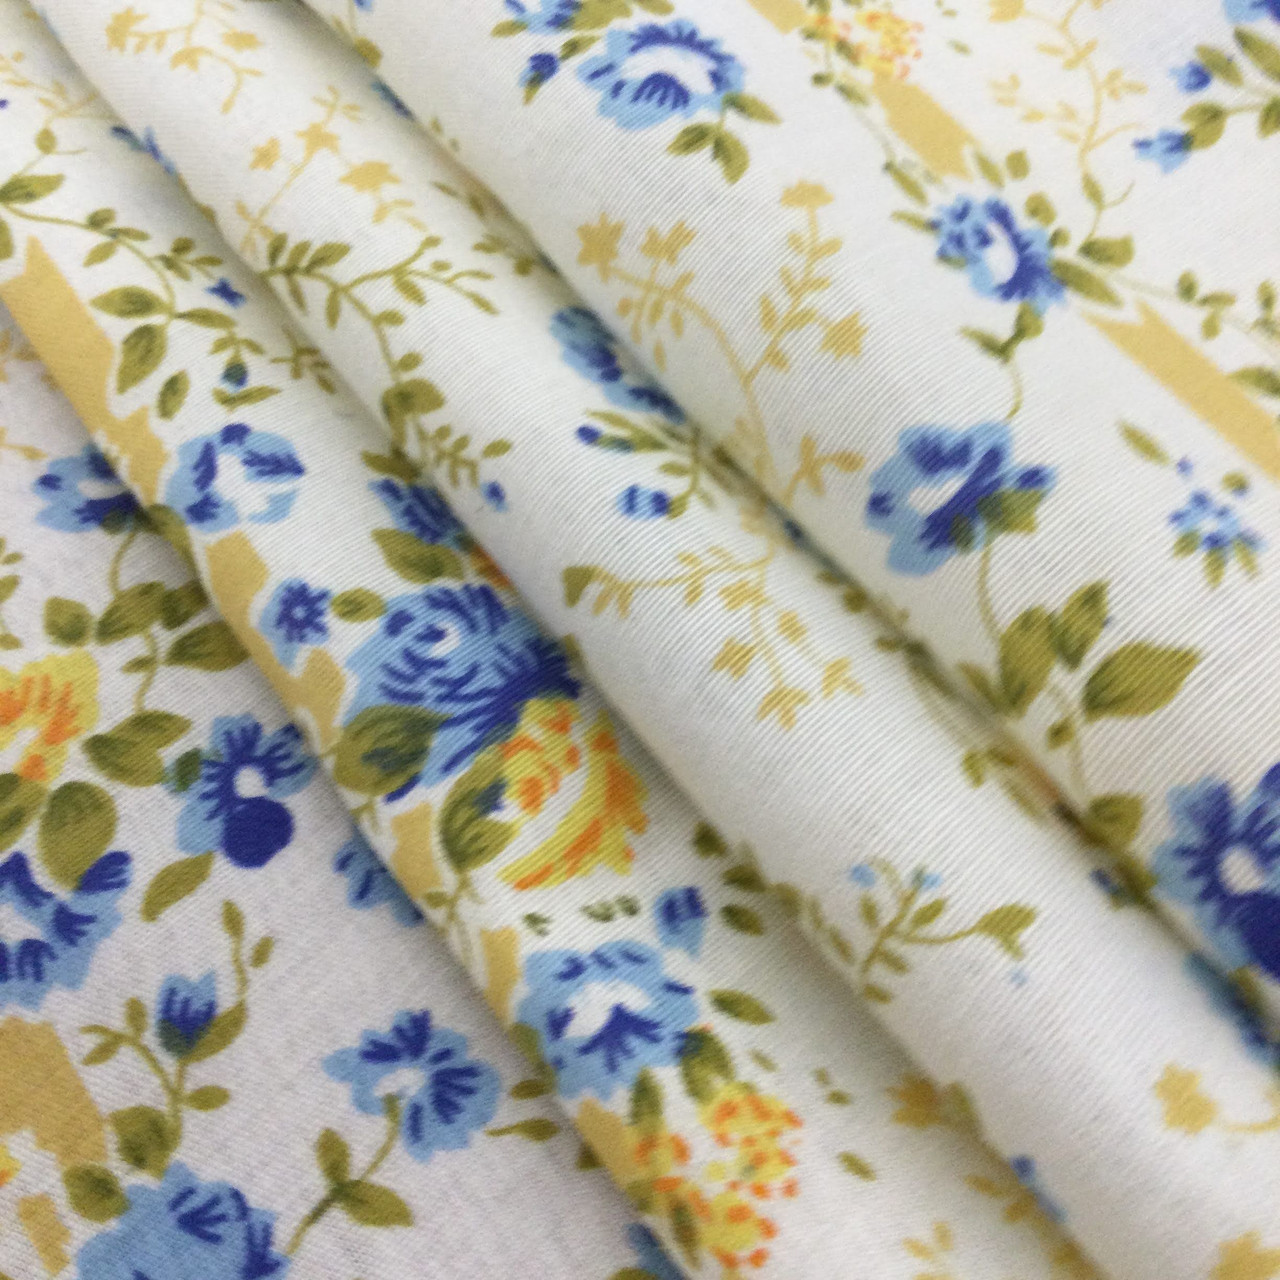 Vintage Floral Fabric in Yellow / Blue / Green